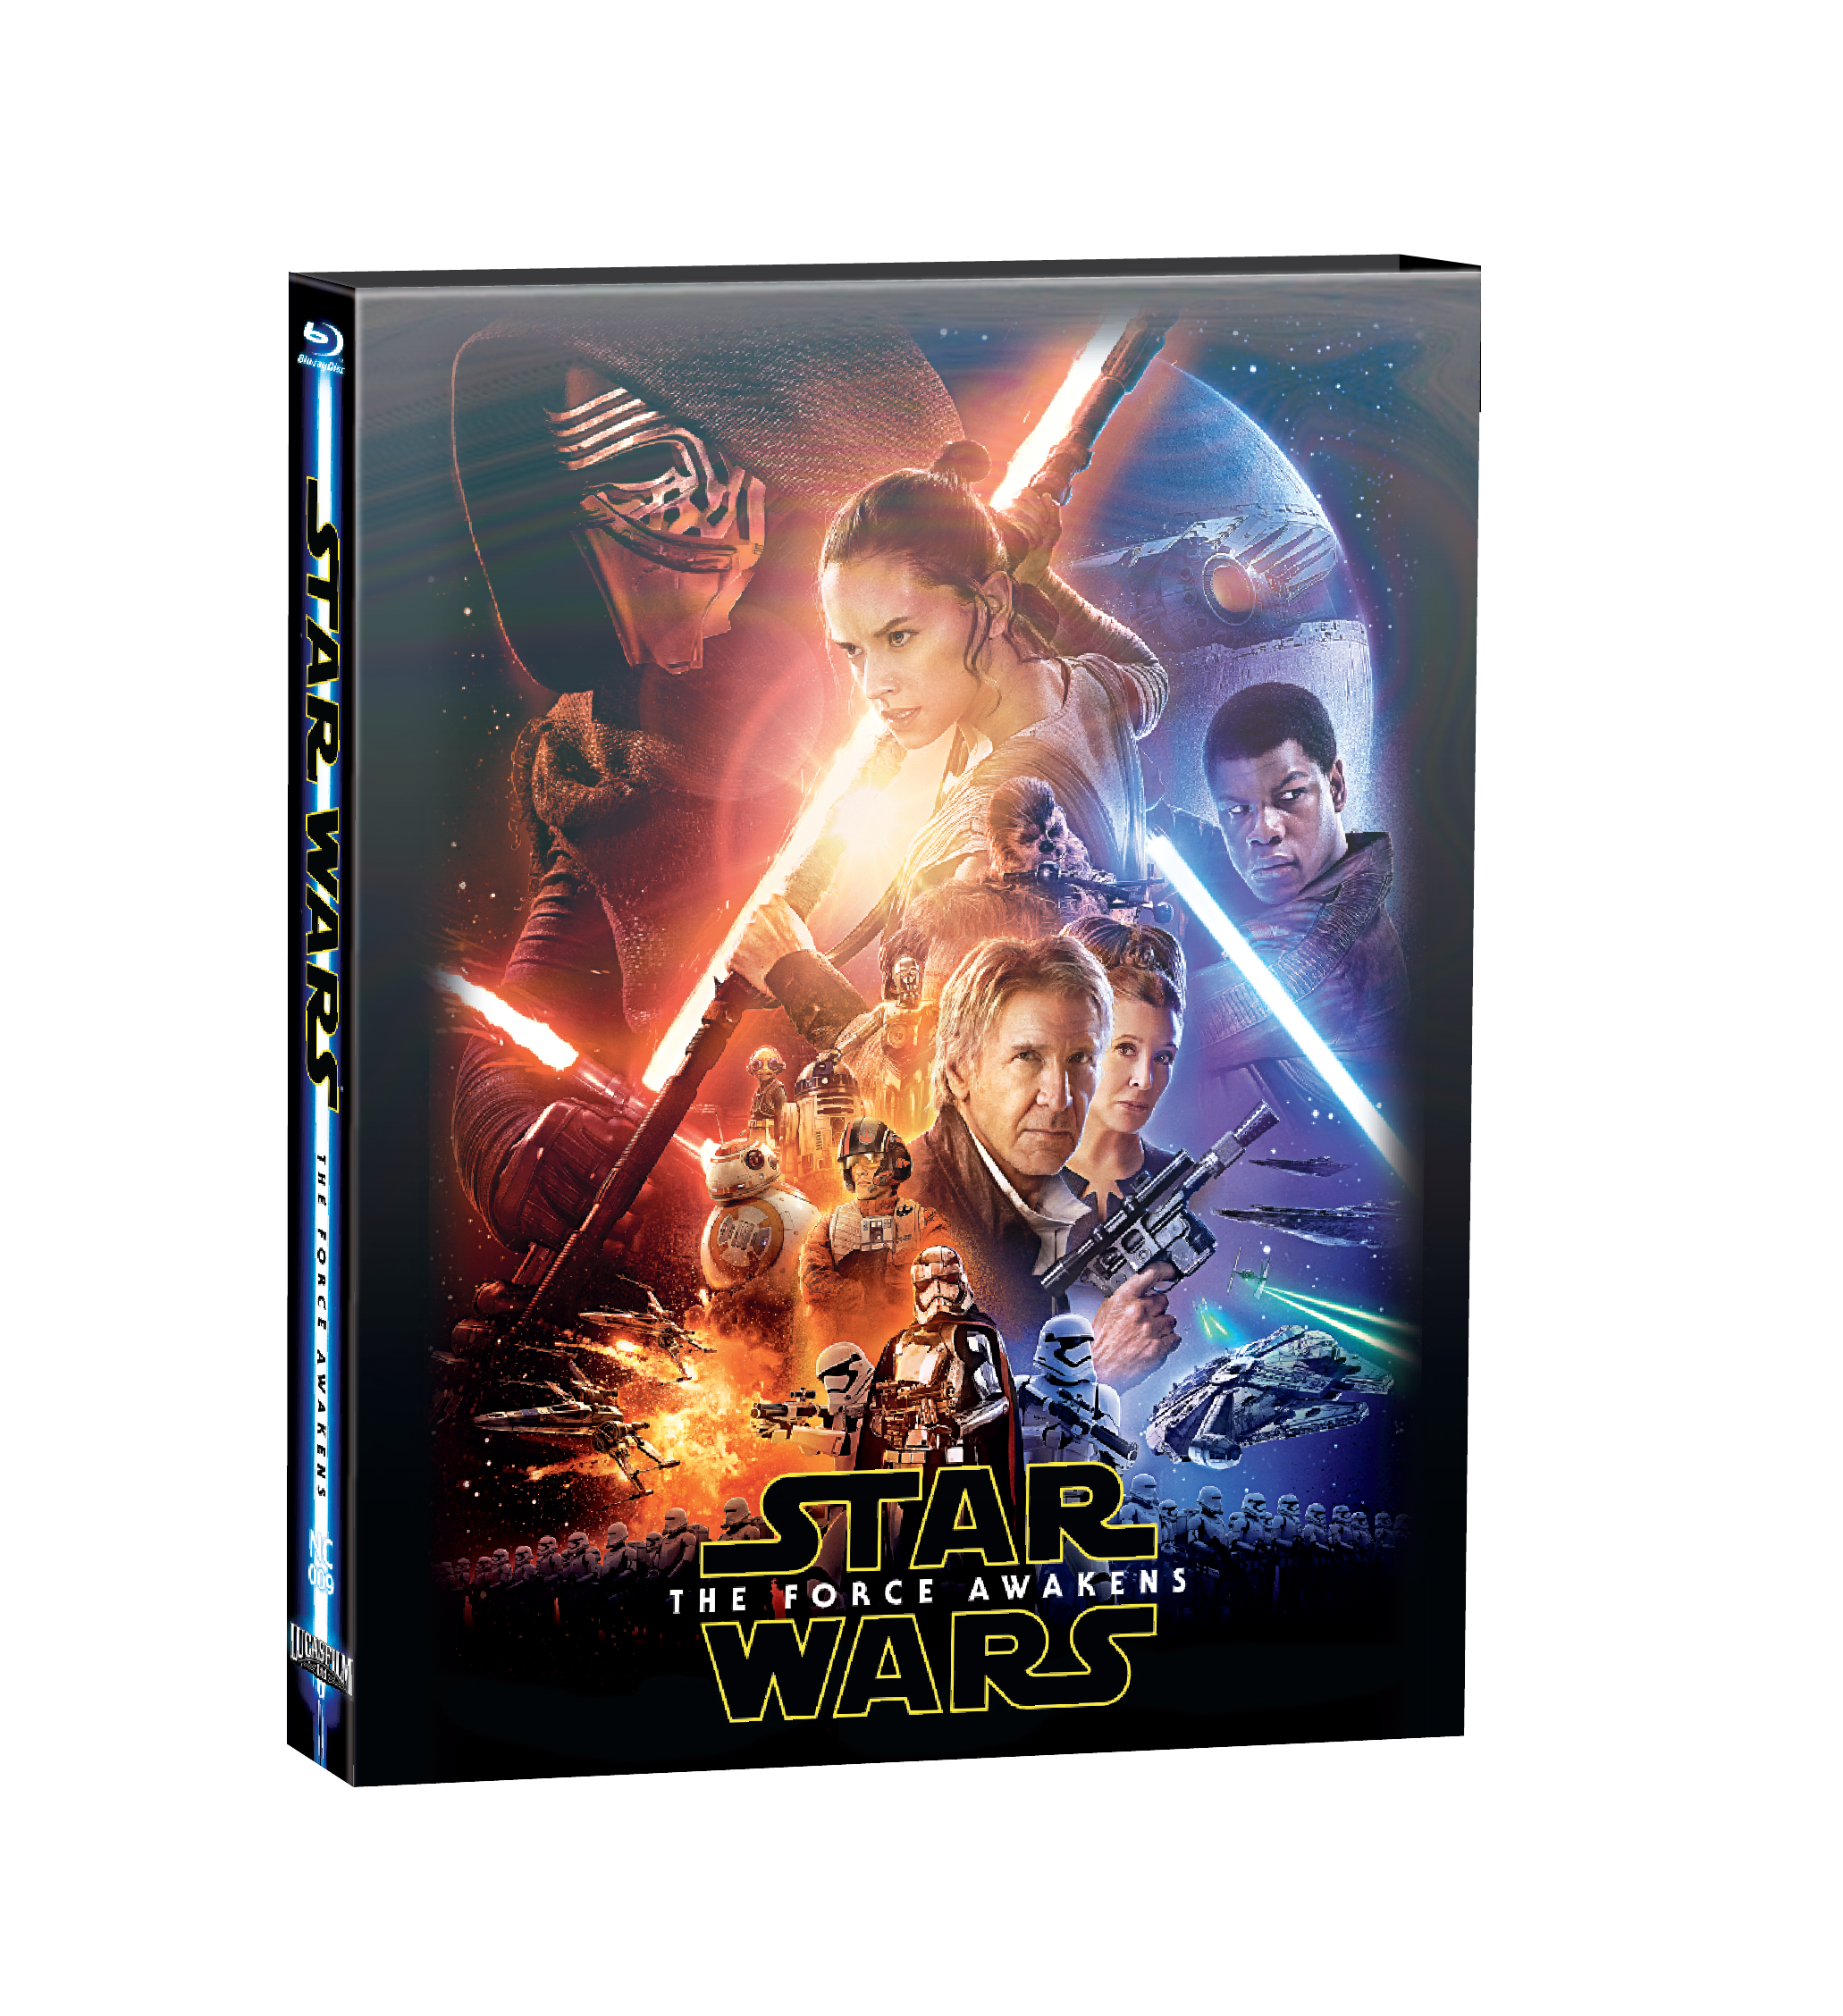 STAR WARS: EPISODE VII - THE FORCE AWAKENS STEELBOOK LENTI SLIP-A(LIMITED 400 COPIES) NC#9